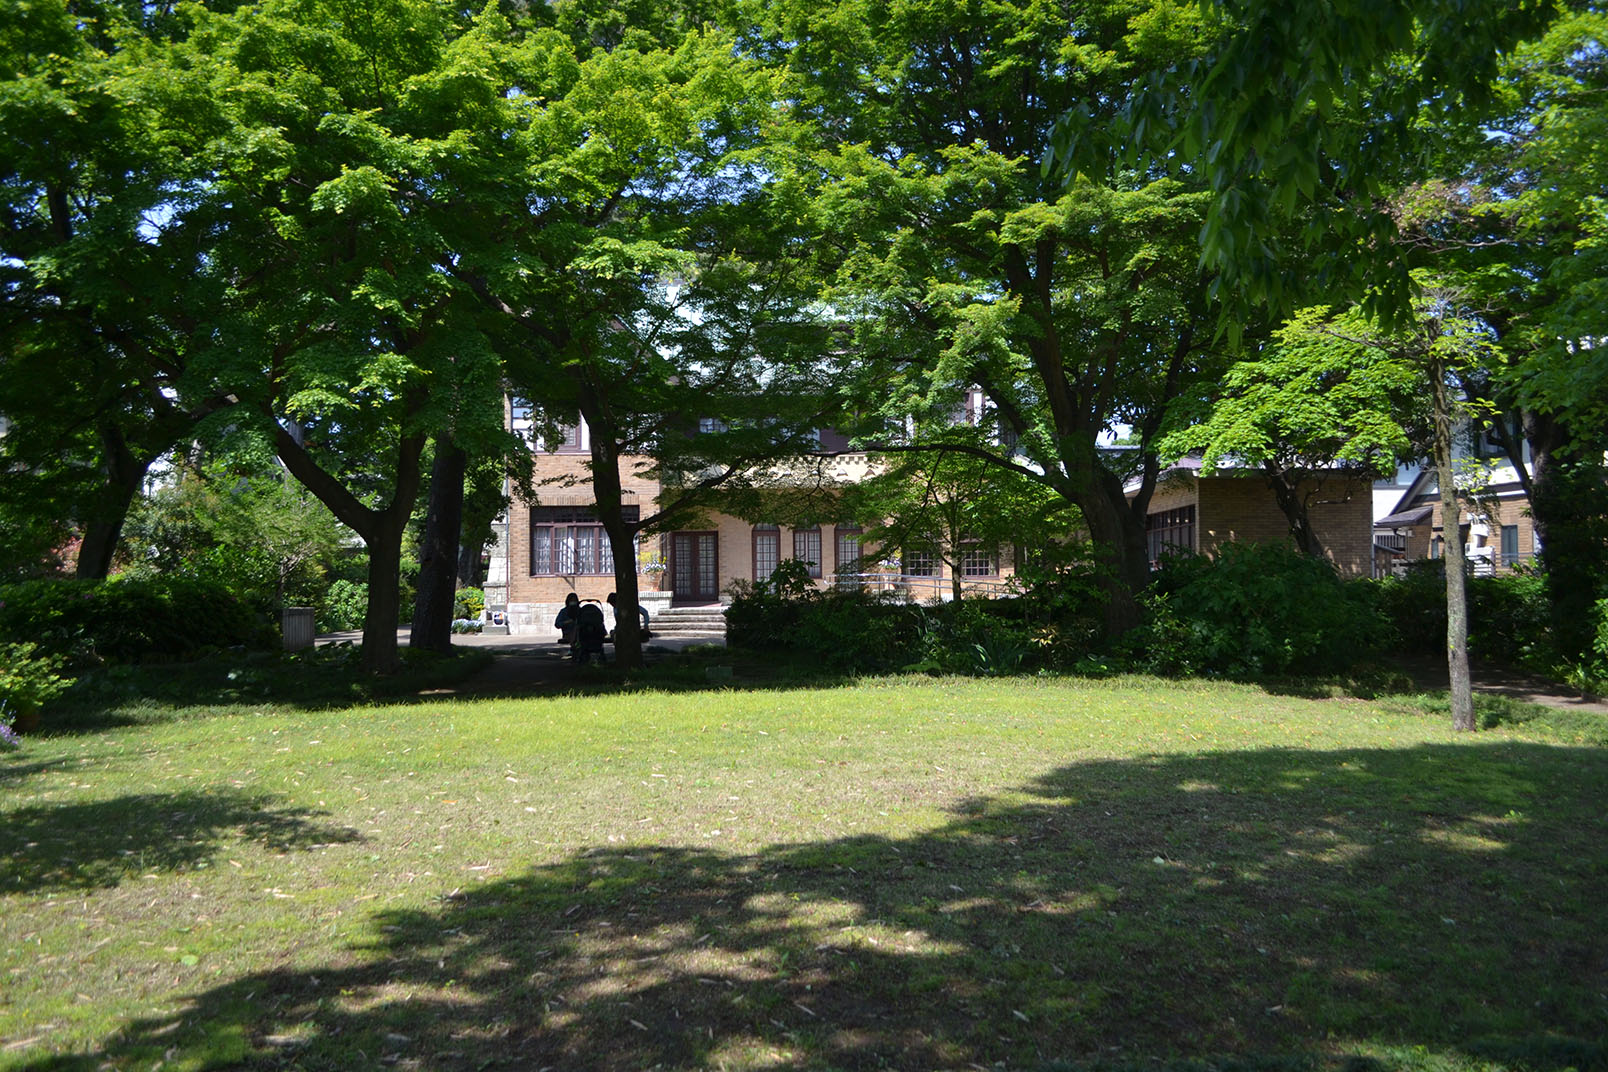 A small suburban garden in the sunshine, with a grassy lawn, an old house in the background and just a couple of people in the shade of a line of trees in between the lawn and building.